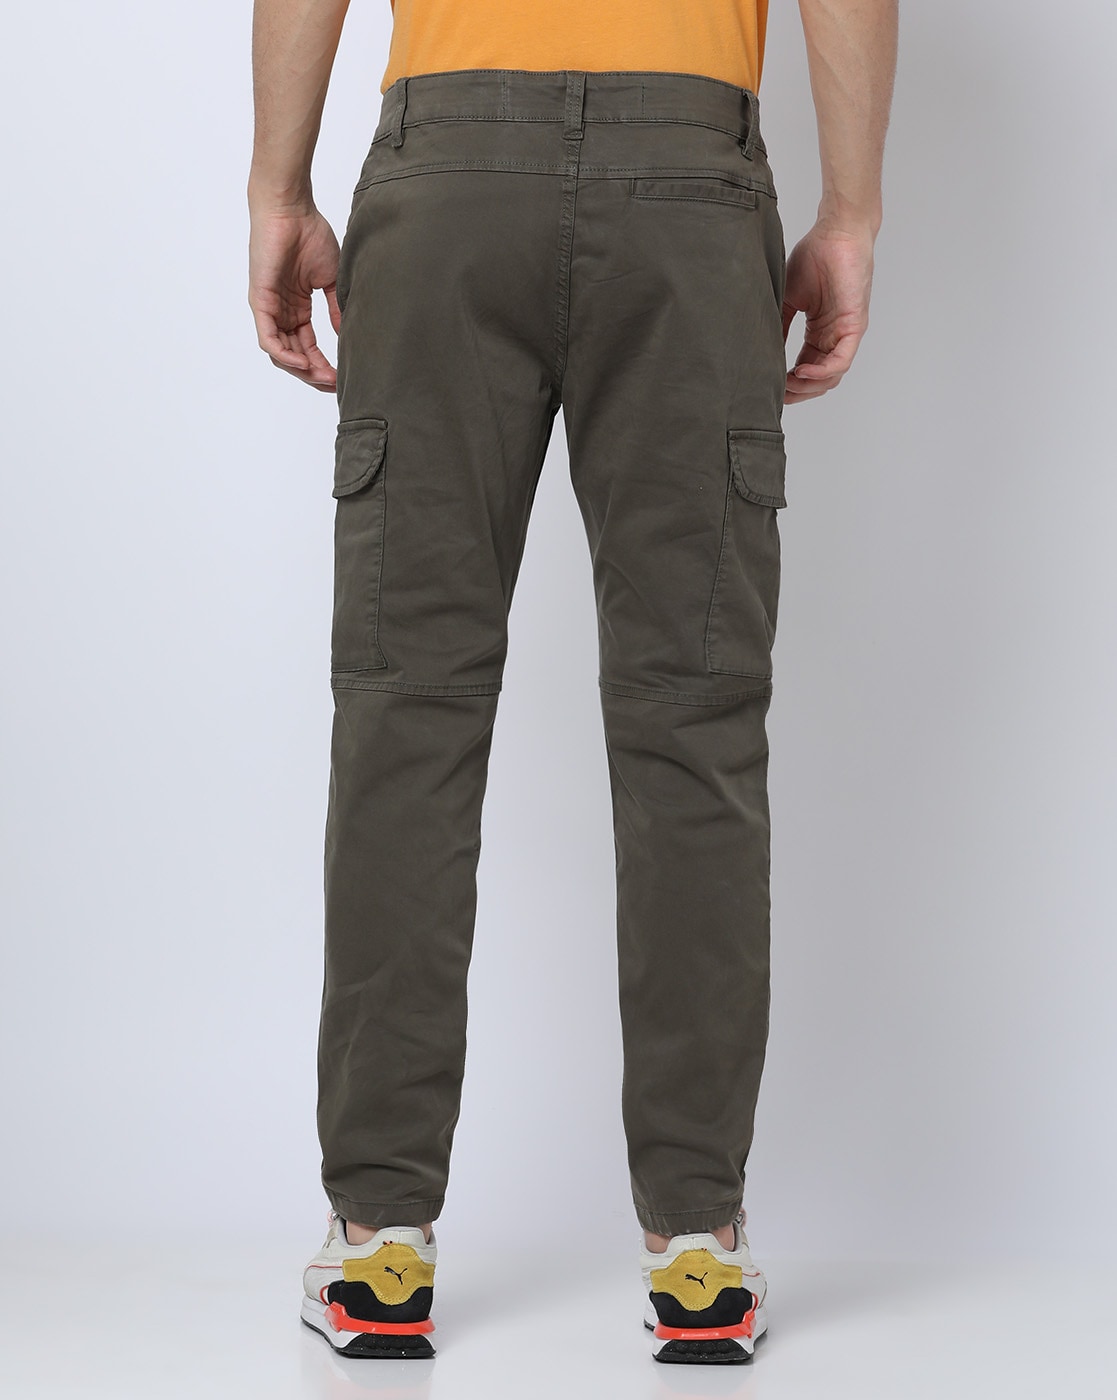 Buy Columbia Sportswear Men's Silver Ridge Cargo Pant, Fossil, 48 x 32  Online at Low Prices in India - Amazon.in